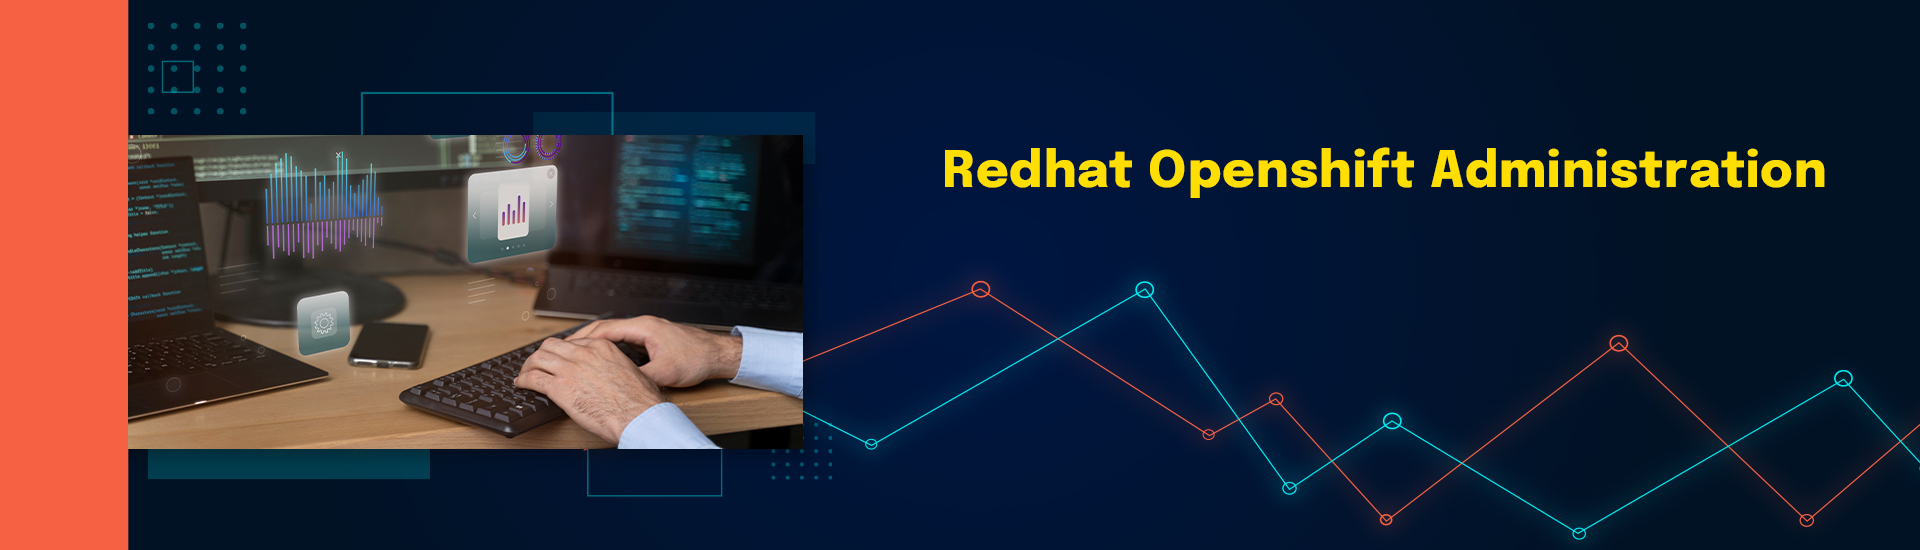 Redhat Openshift Administration